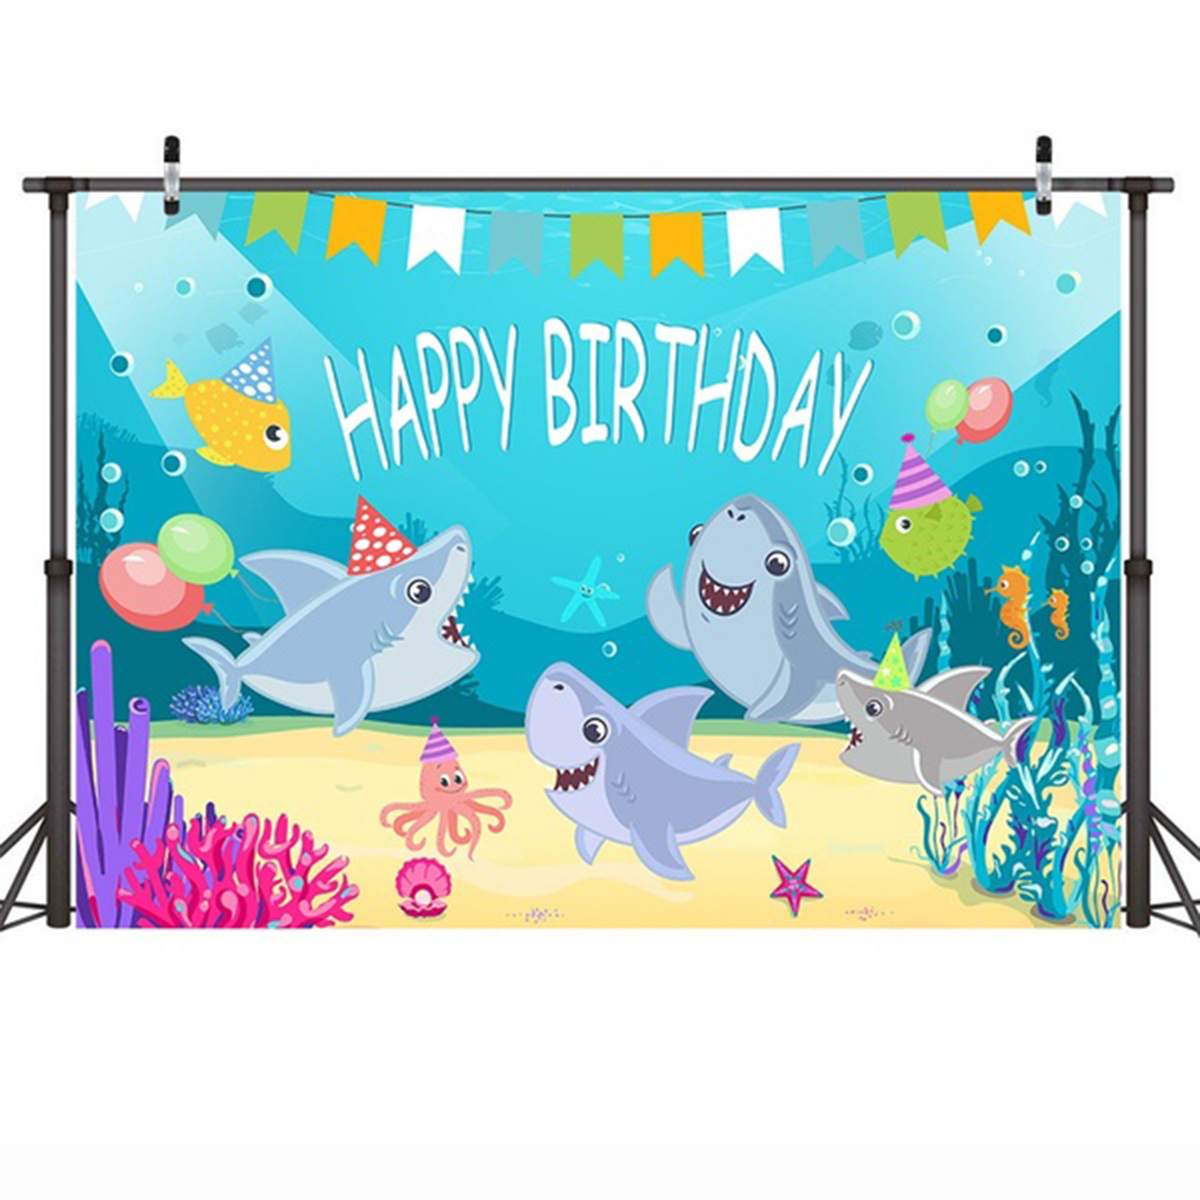 Shark-Photography-Backdrop-Baby-Shower-Party-Birthday-Ocean-Sea-Background-Party-Decorations-1635644-6